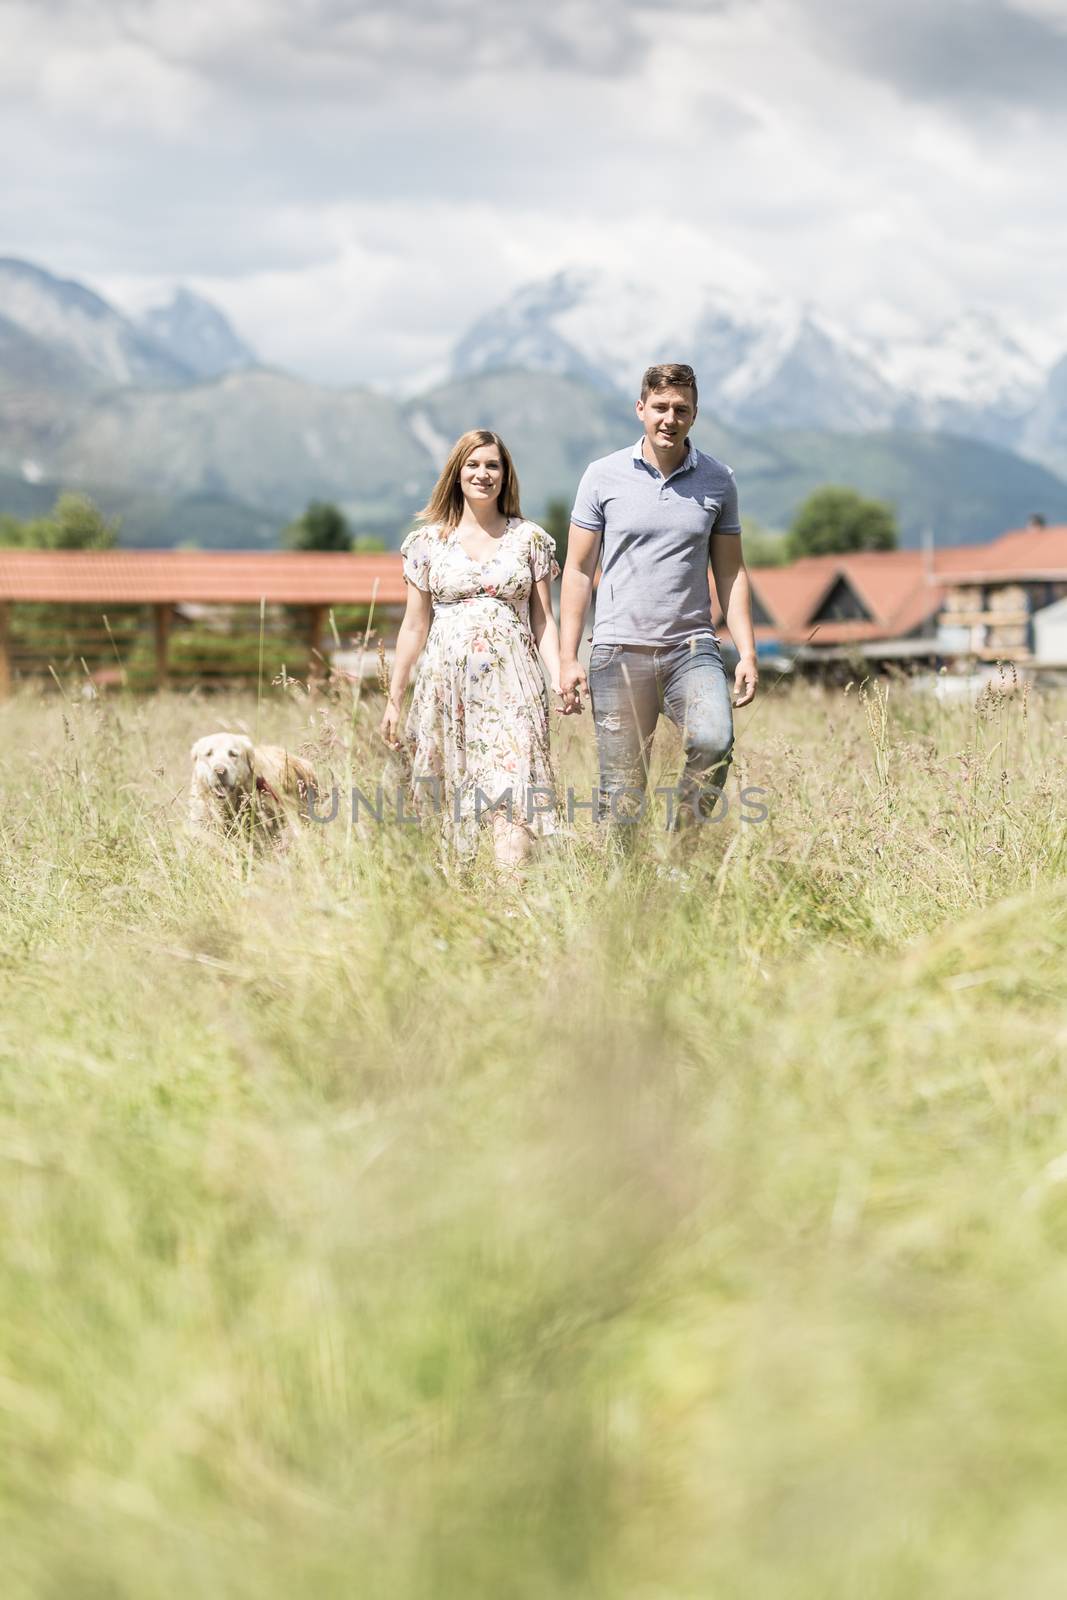 Young pregnant couple holding hands walking it's Golden retriever dog outdoors in meadow. by kasto